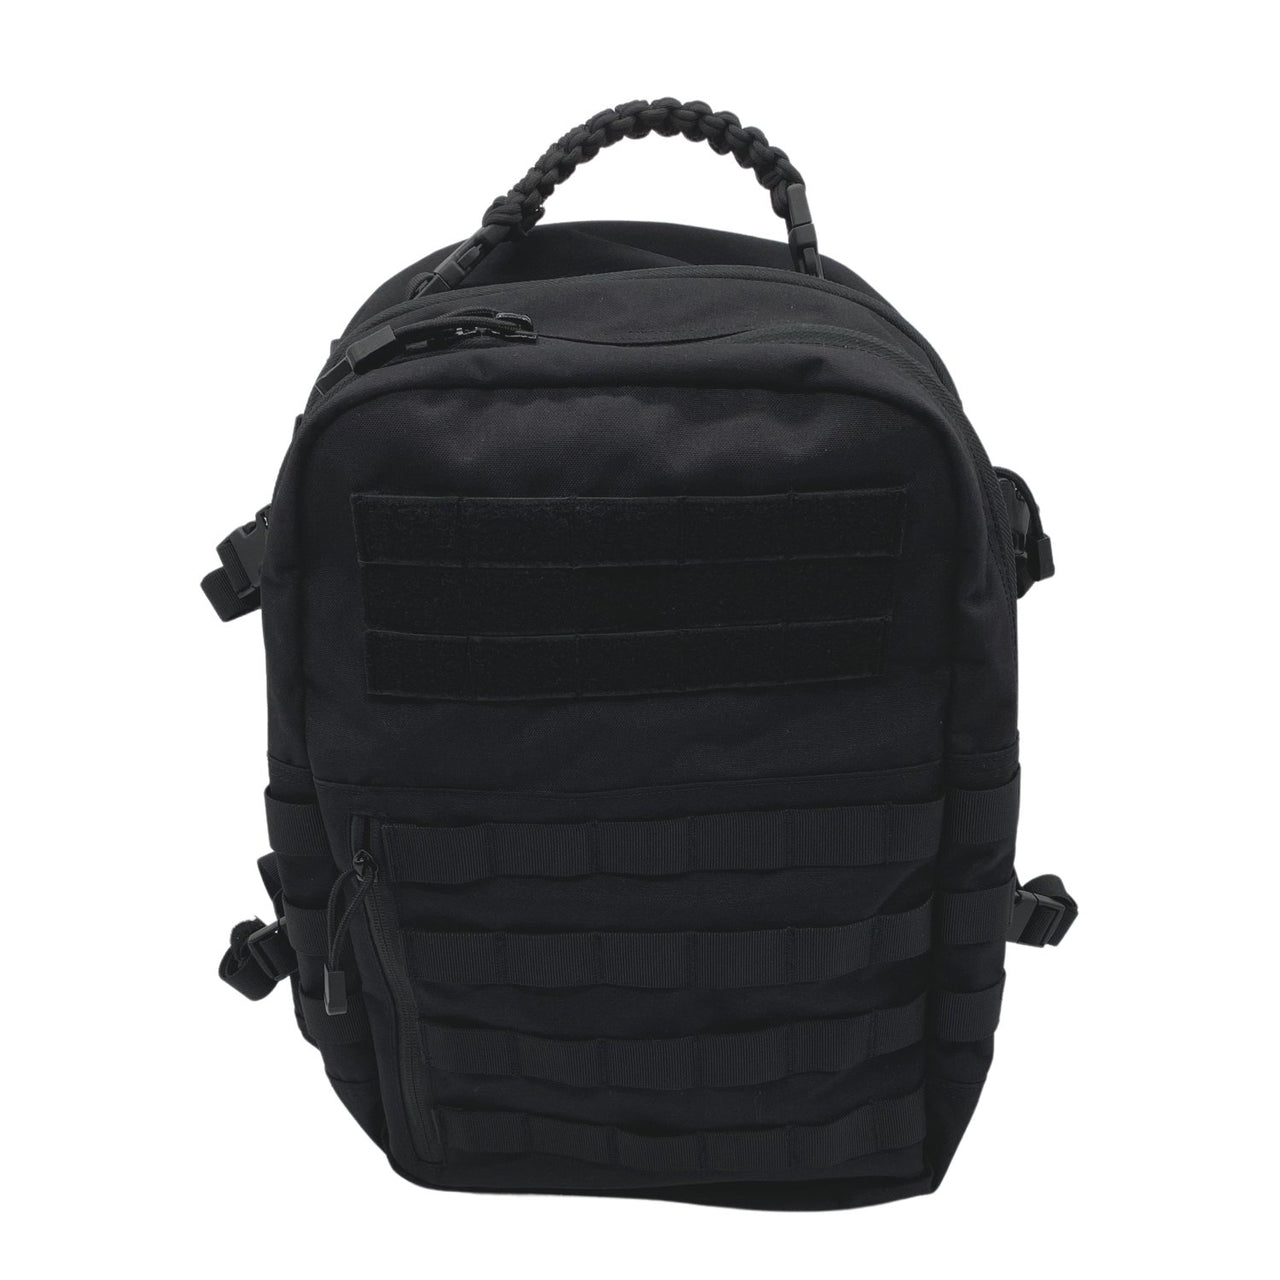 A black Body Armor Direct Tactical Backpack Enhanced Multi-Threat with molle webbing, multi-threat protection, and multiple compartments, isolated on a white background.